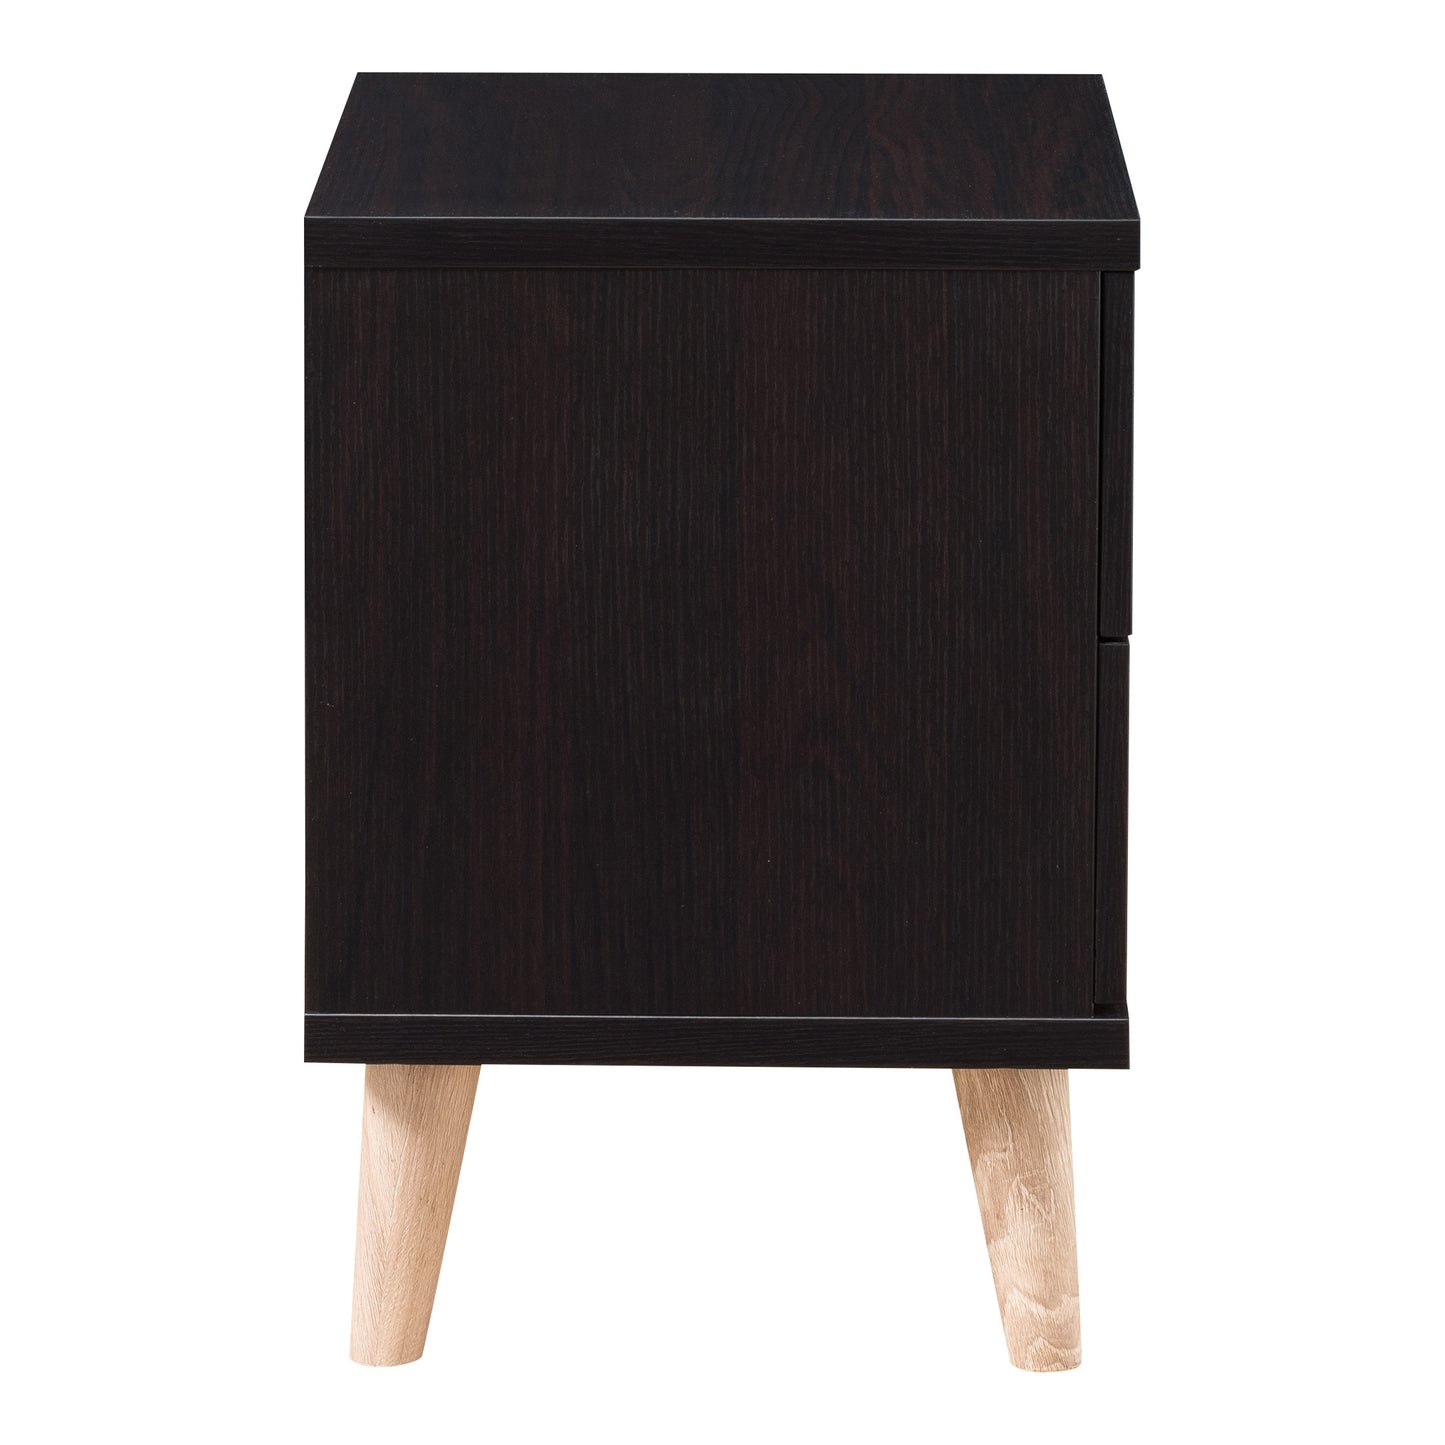 Front-facing side view of a mid-century modern cappuccino two-drawer nightstand on a white background